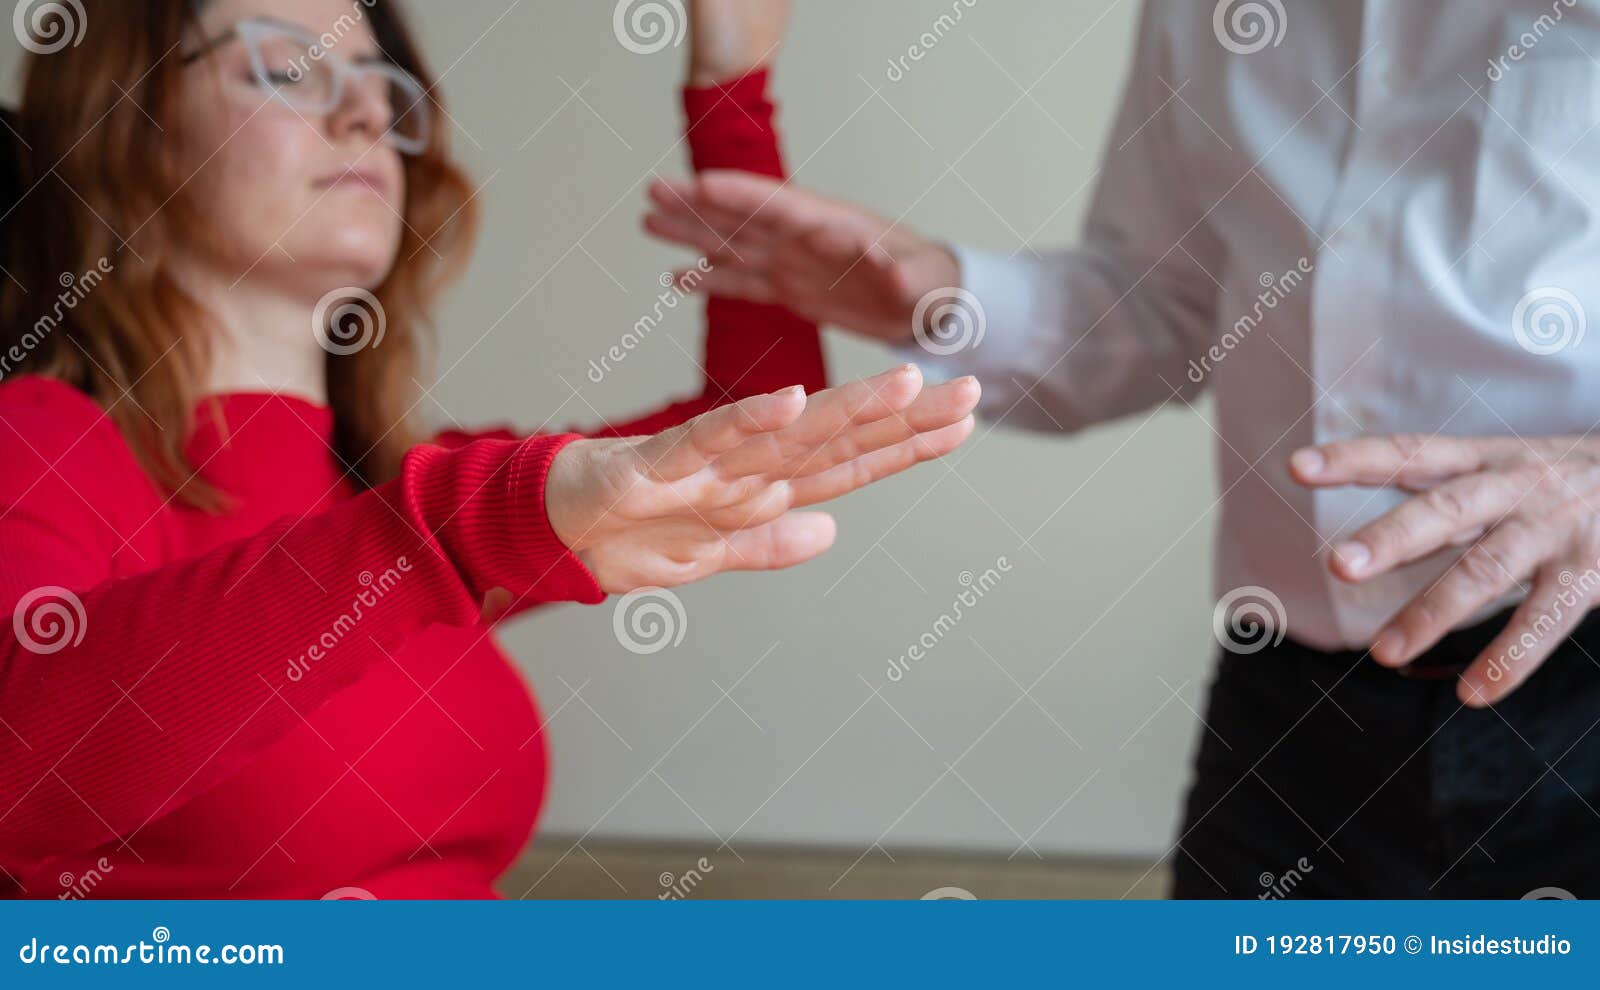 an elderly man hypnotizes a female patient. a woman in a session with a male hypnotherapist during a session. therapist